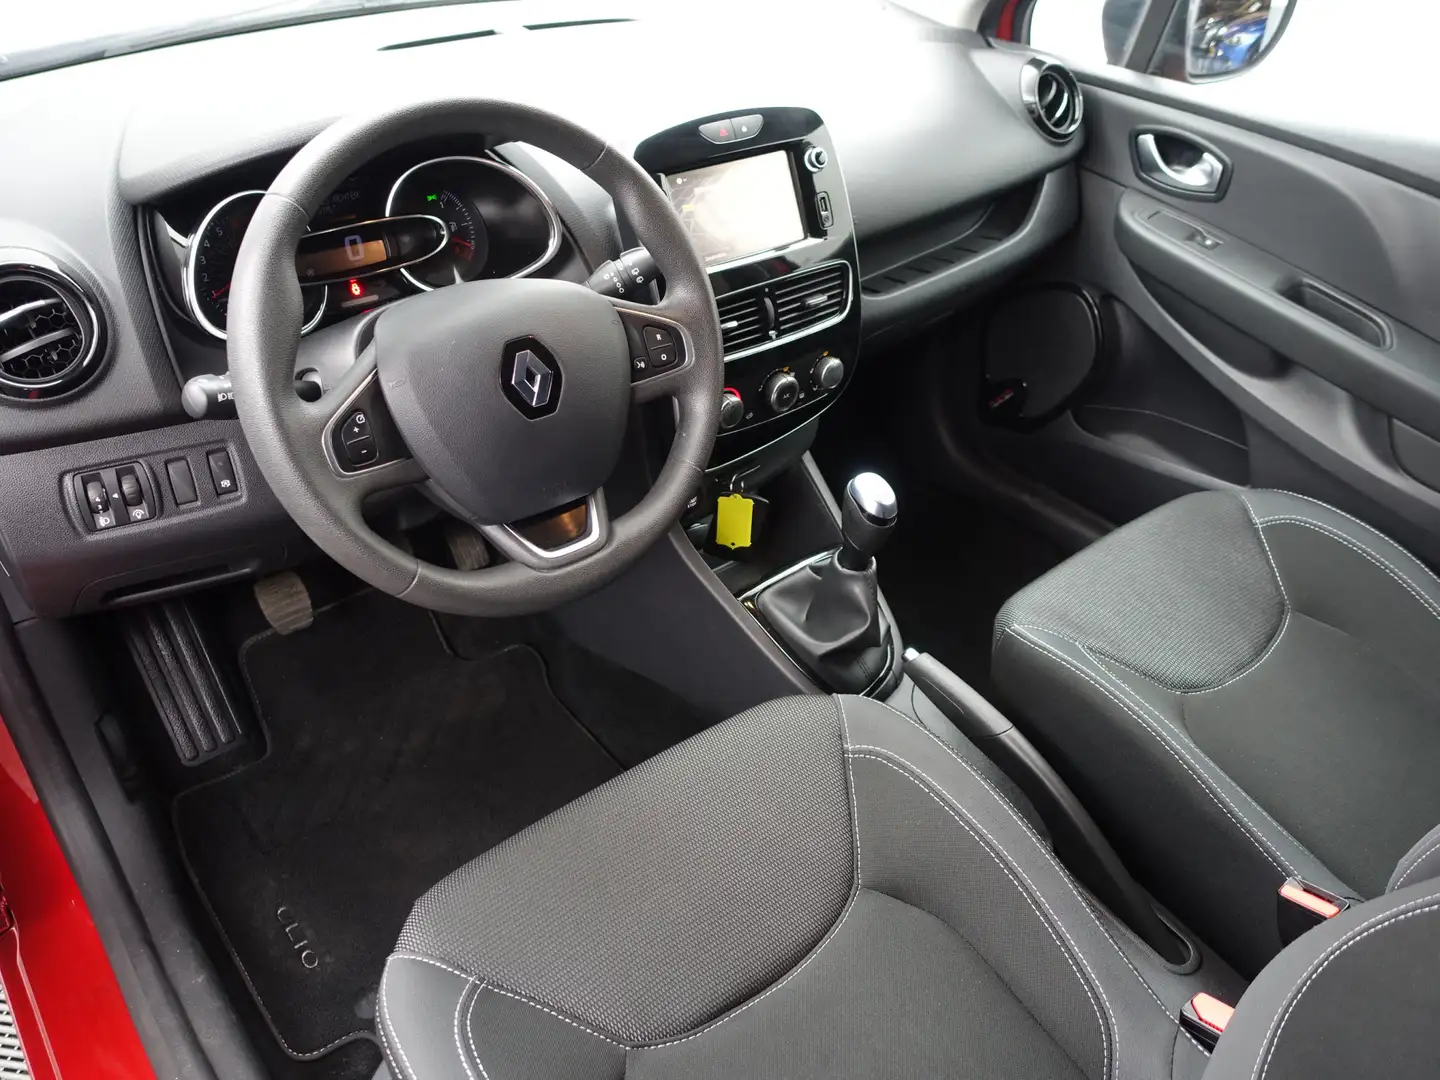 Renault Clio 0.9 TCe GT-line Navi, Clima, Privacy Glas, Cruise, Rood - 2